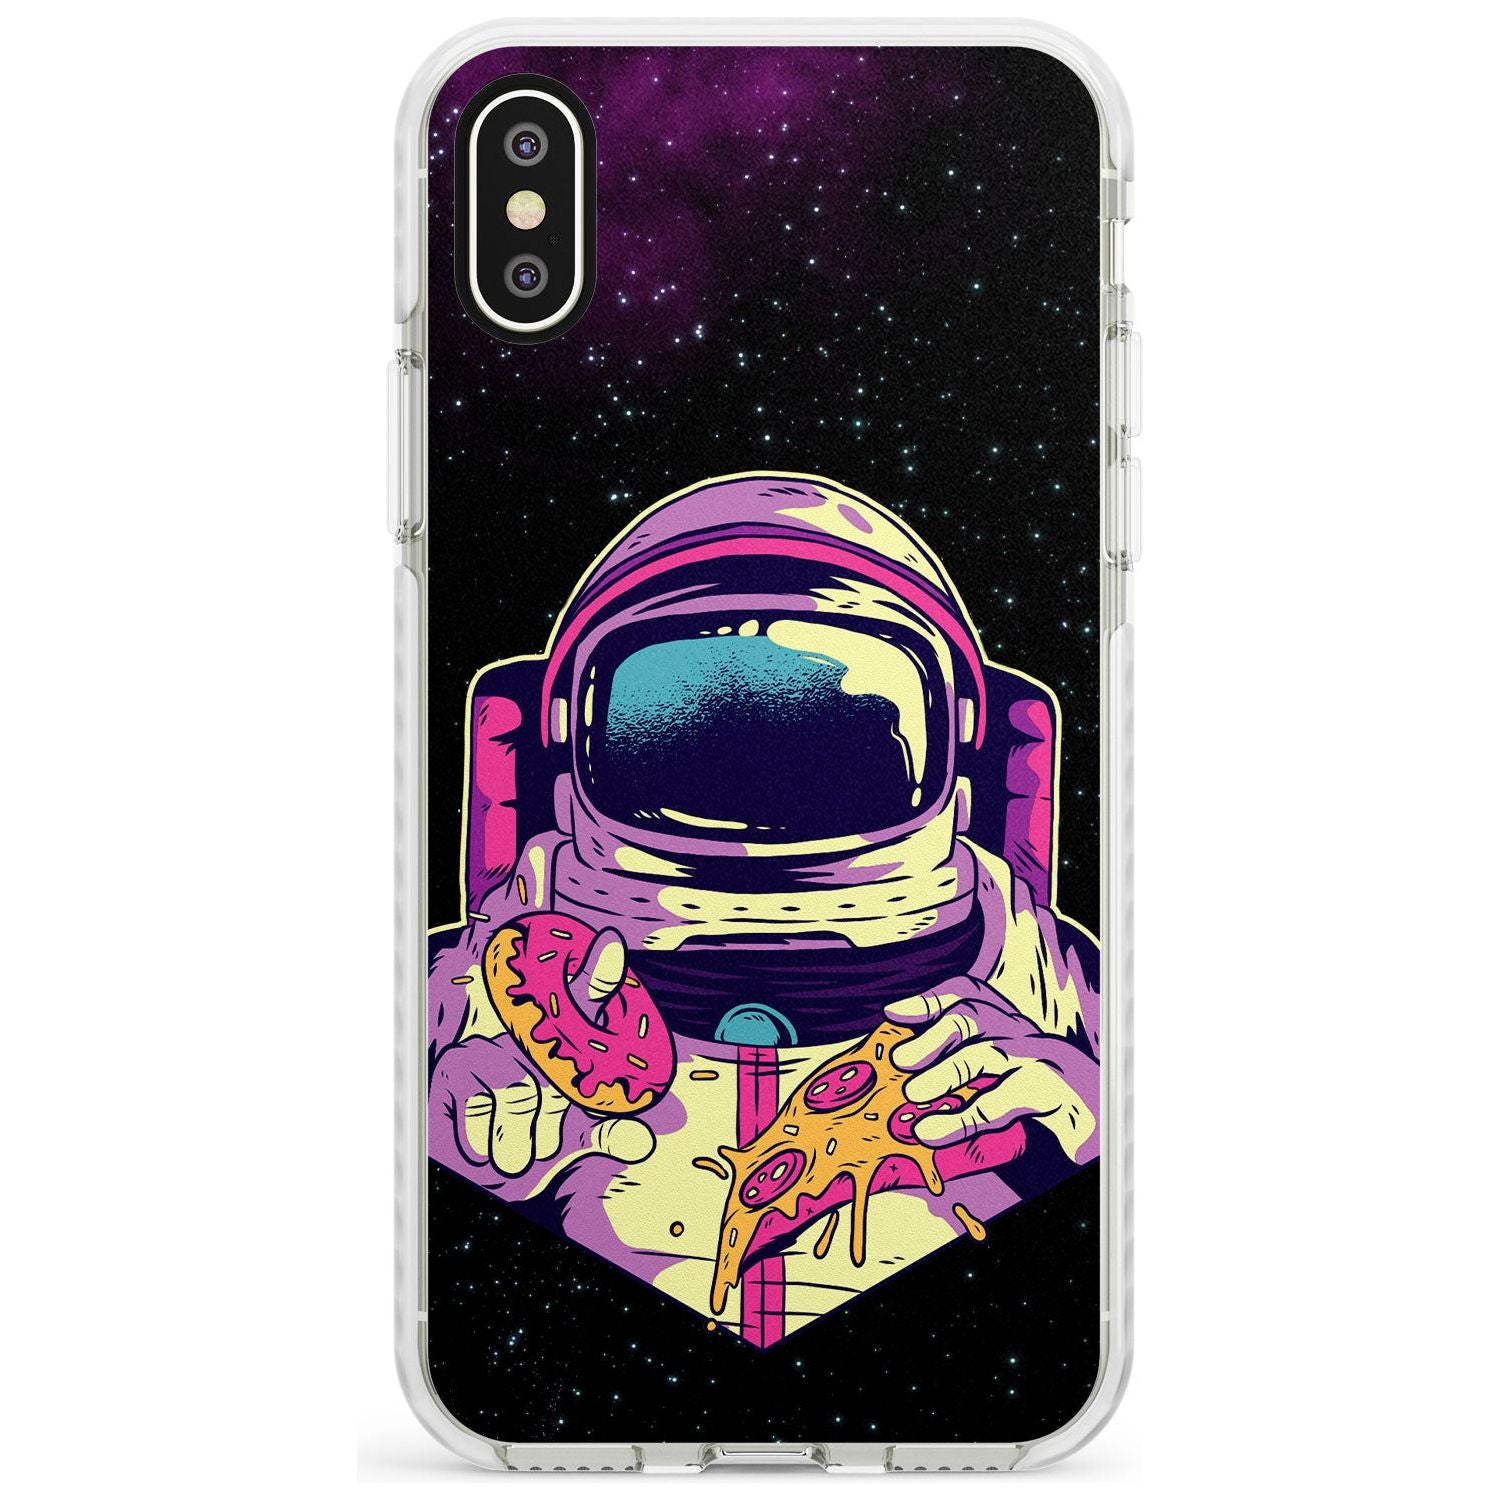 Astro Cheat Meal Impact Phone Case for iPhone X XS Max XR